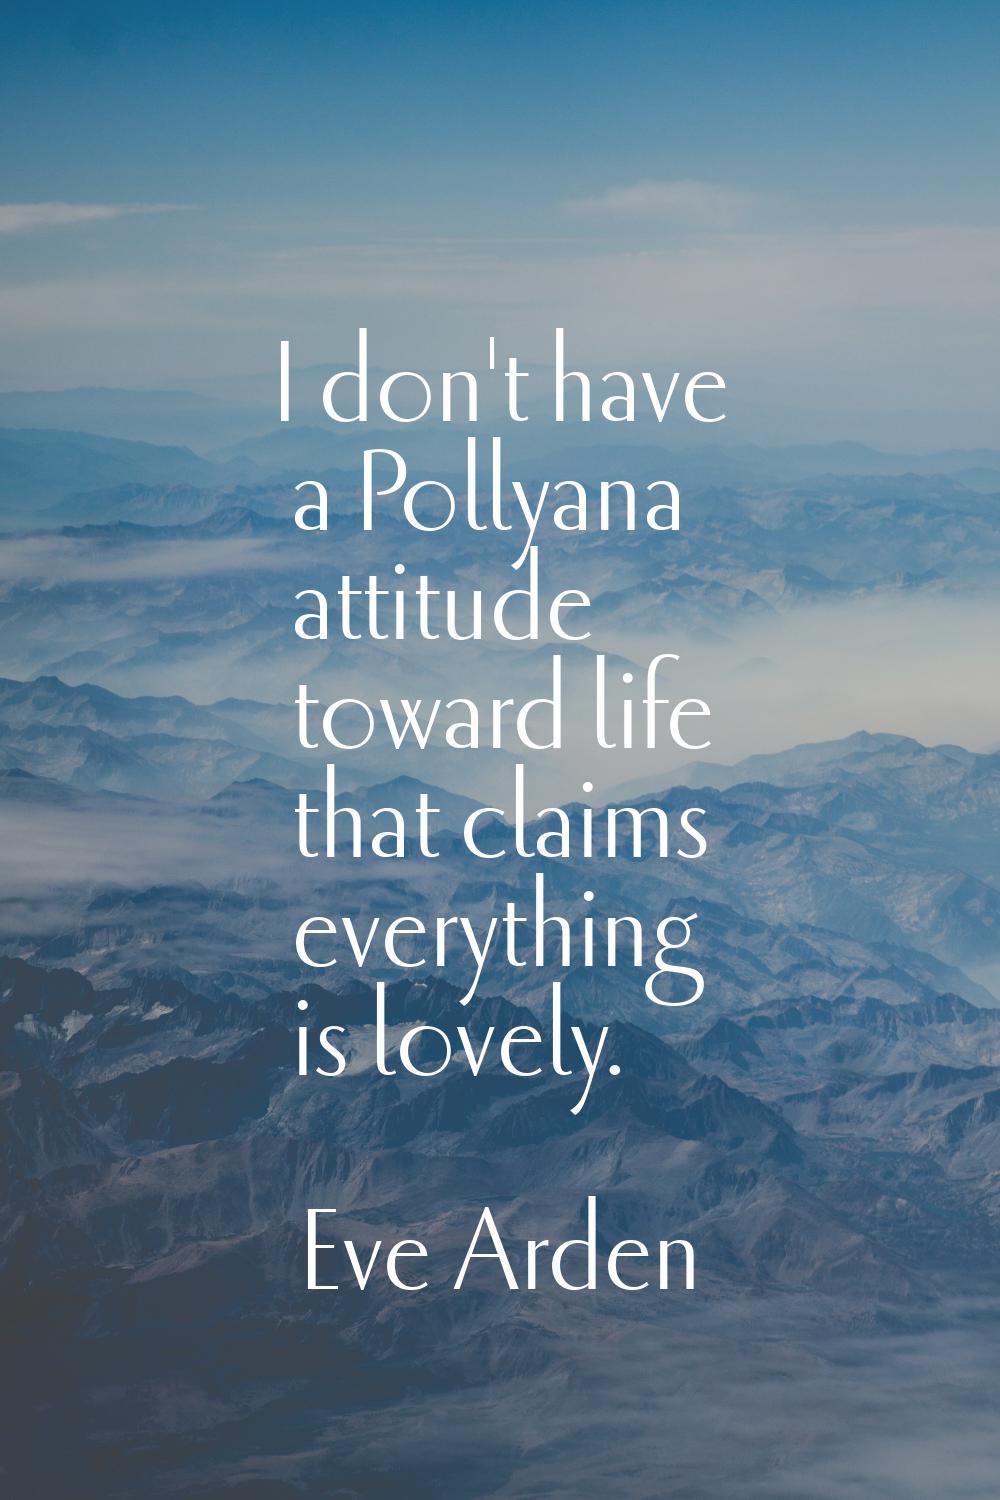 I don't have a Pollyana attitude toward life that claims everything is lovely.